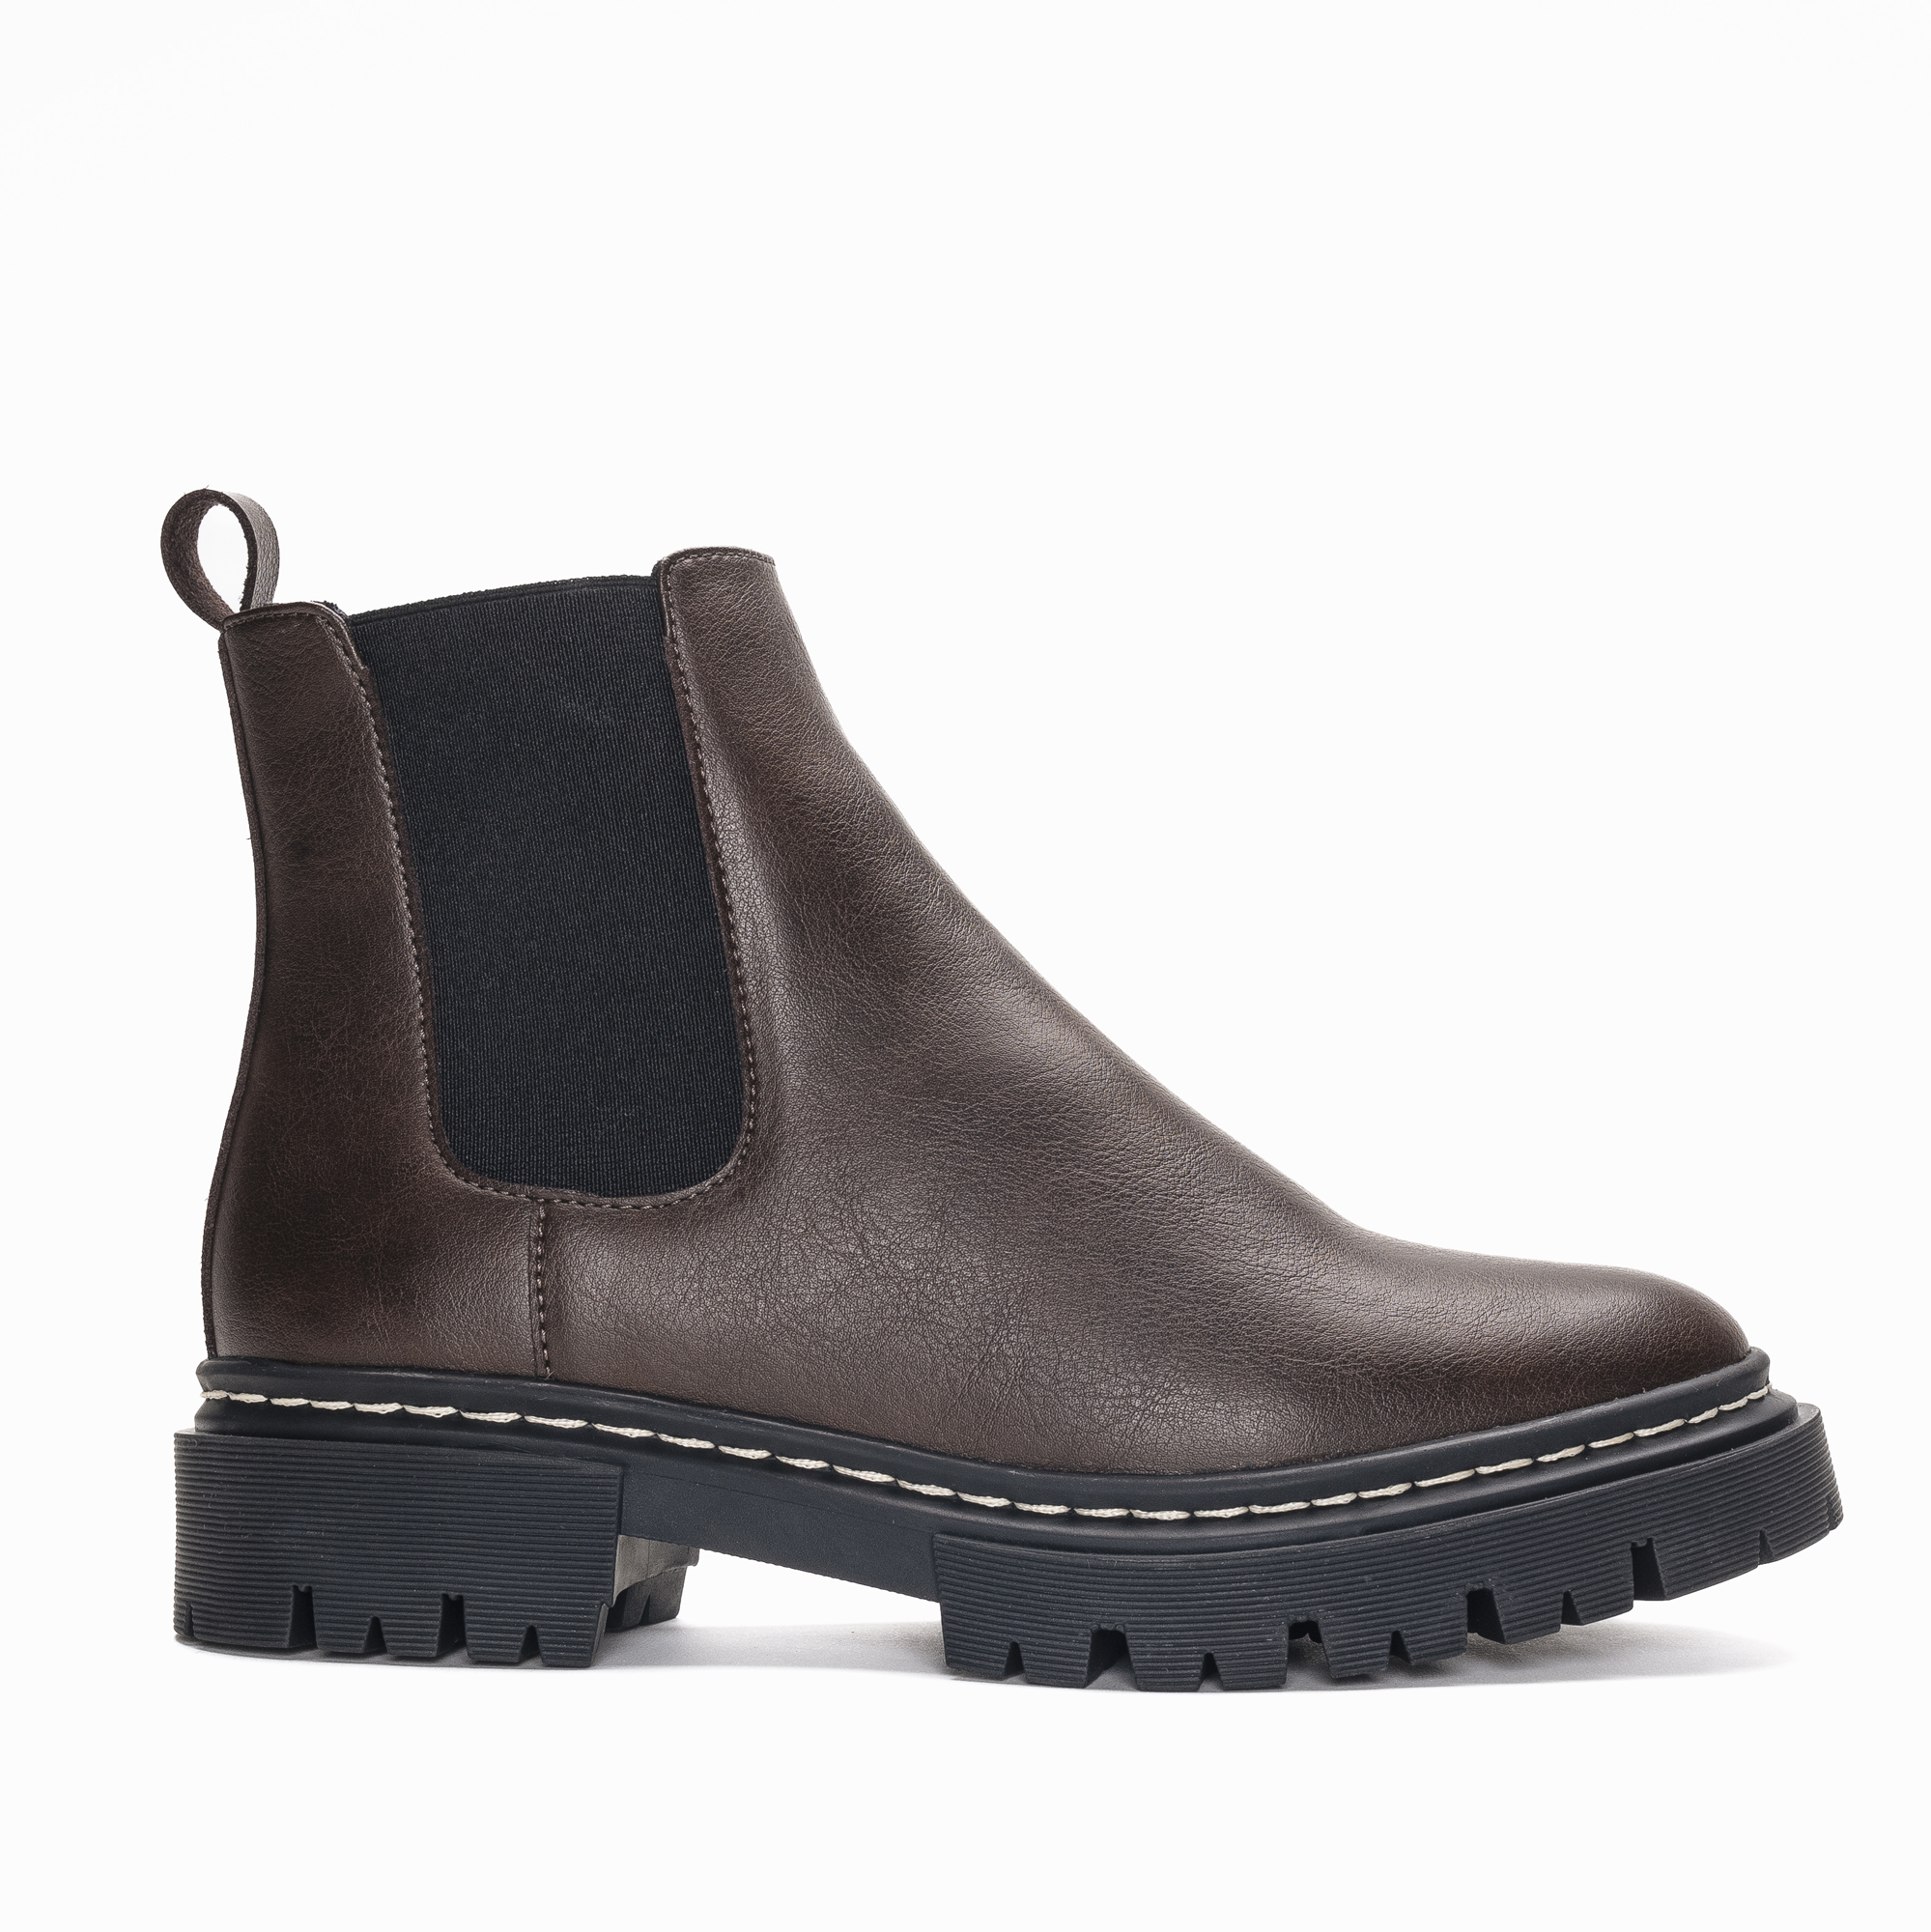 Nae - Duda Brown | Vegan Boots and low shoes